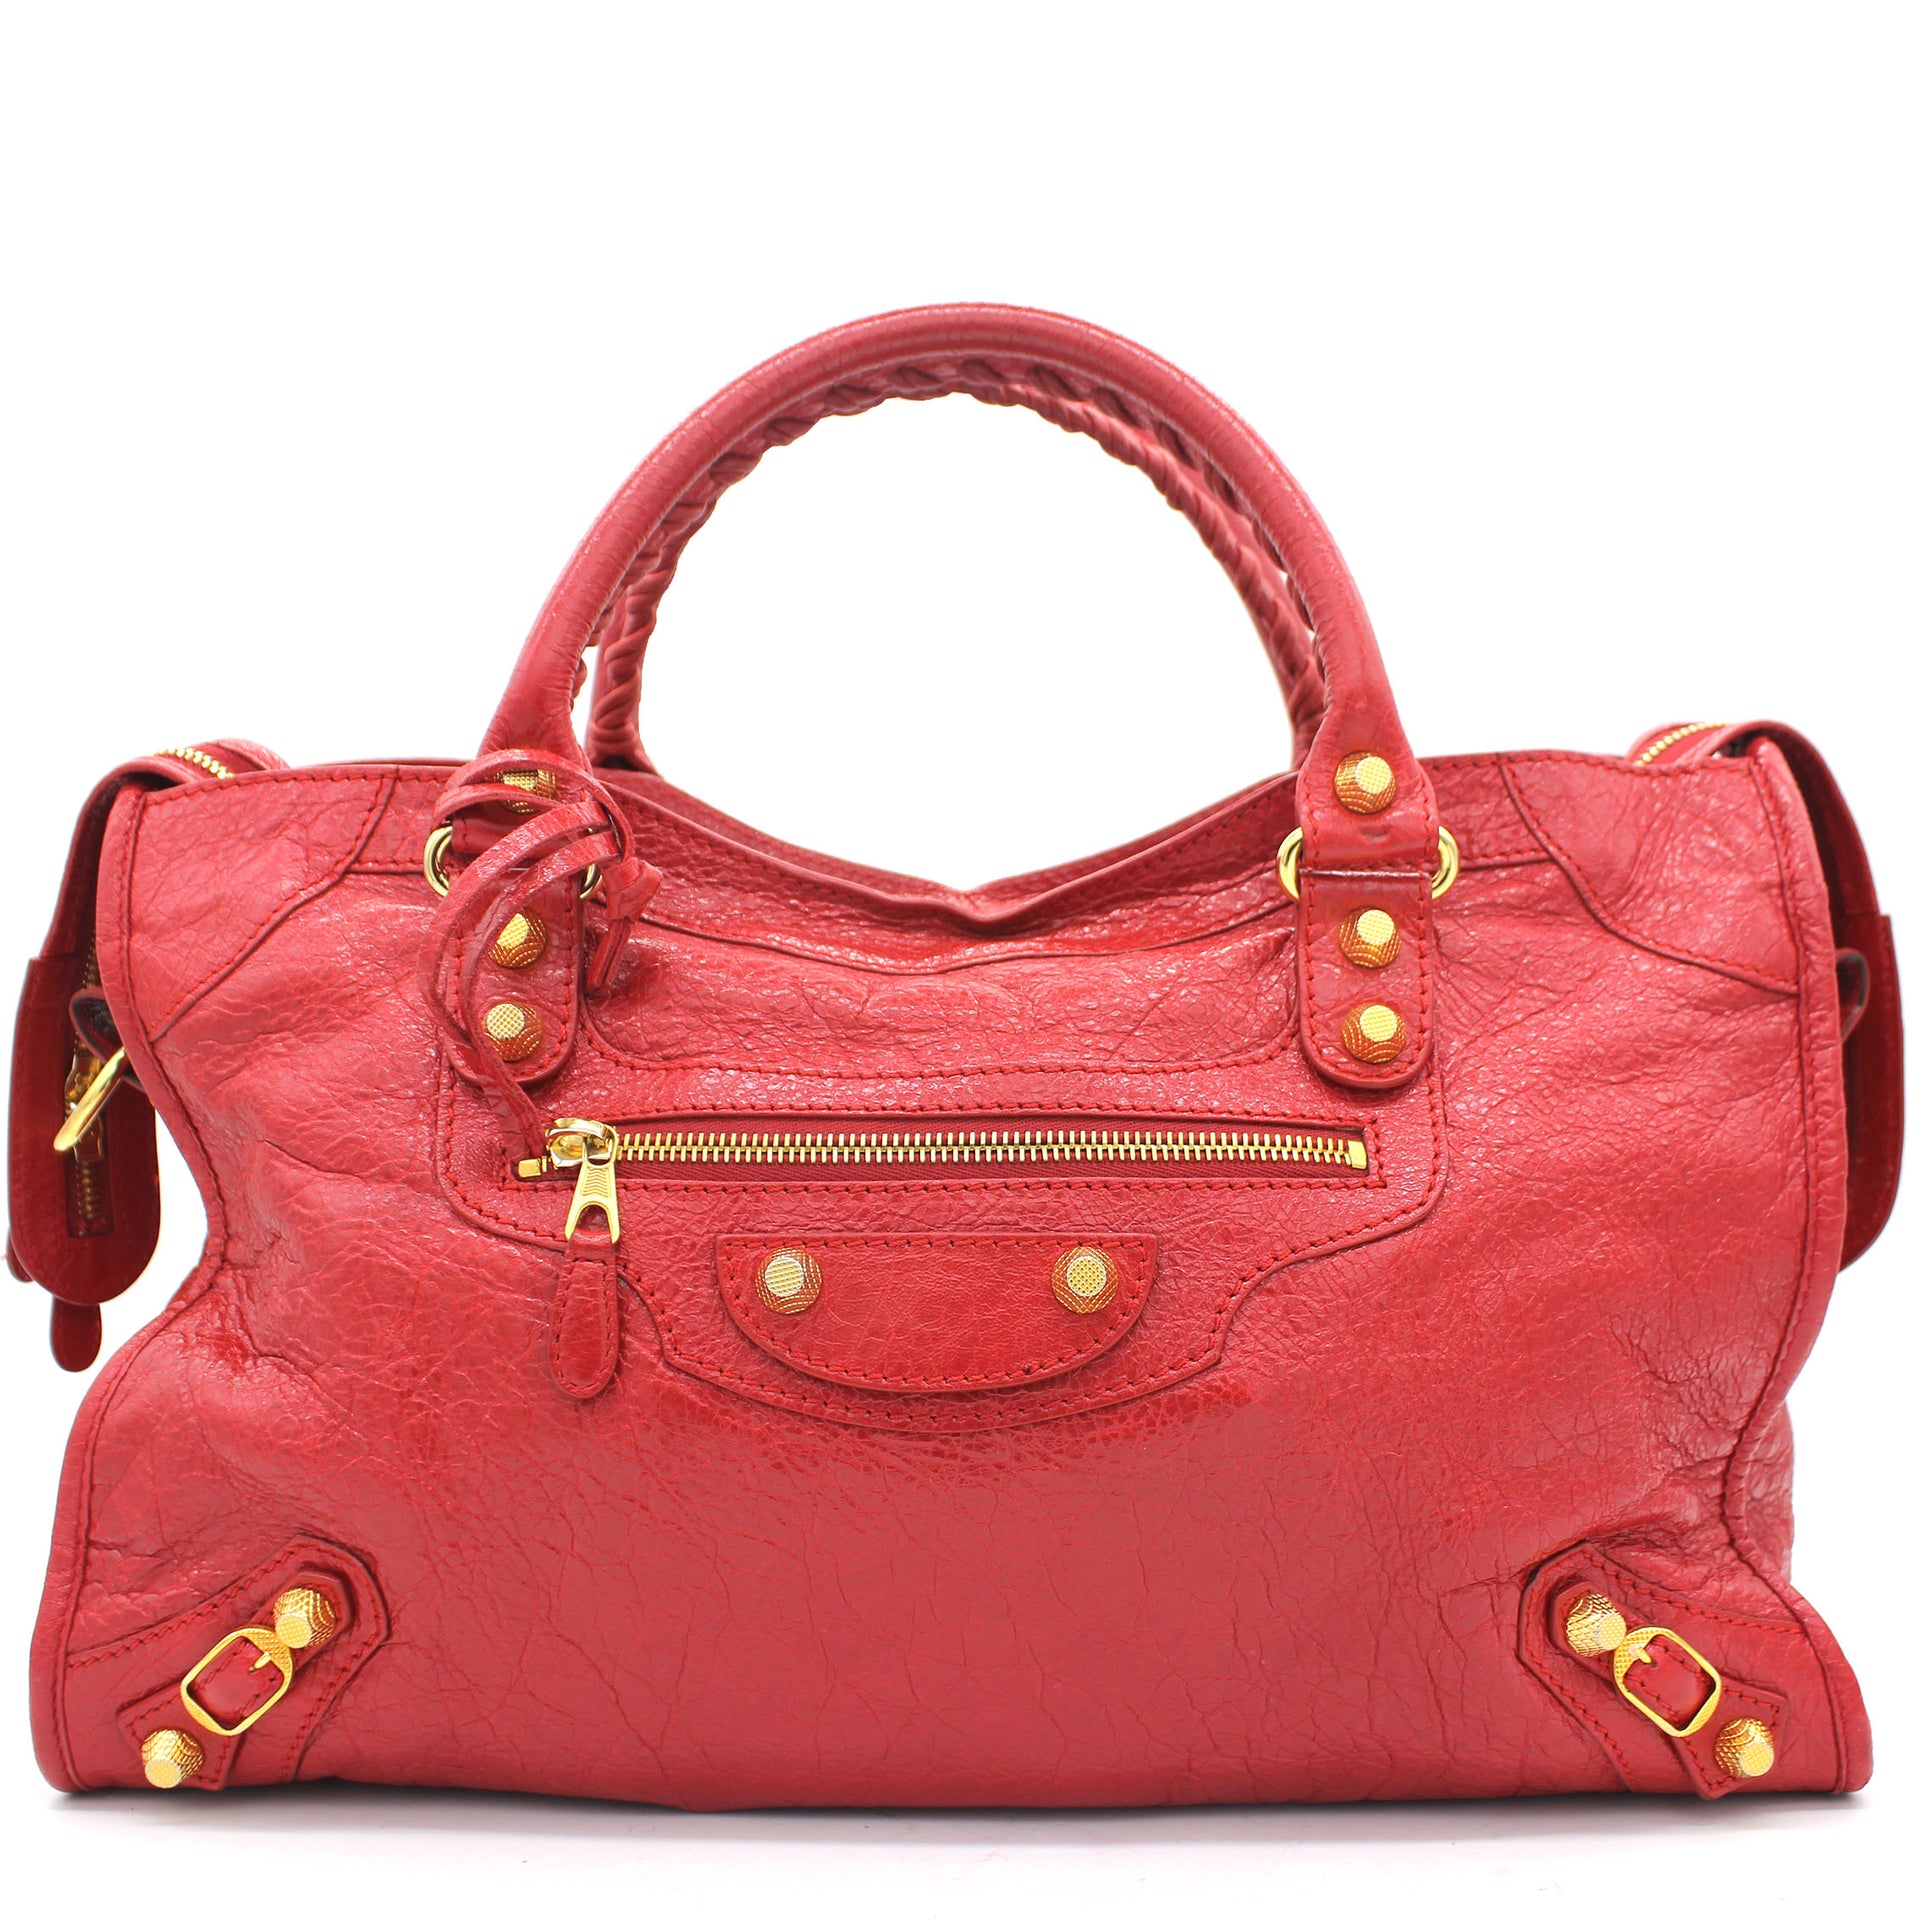 Balenciaga Hourglass Small Croc-embossed Top-handle Bag in Red | Lyst